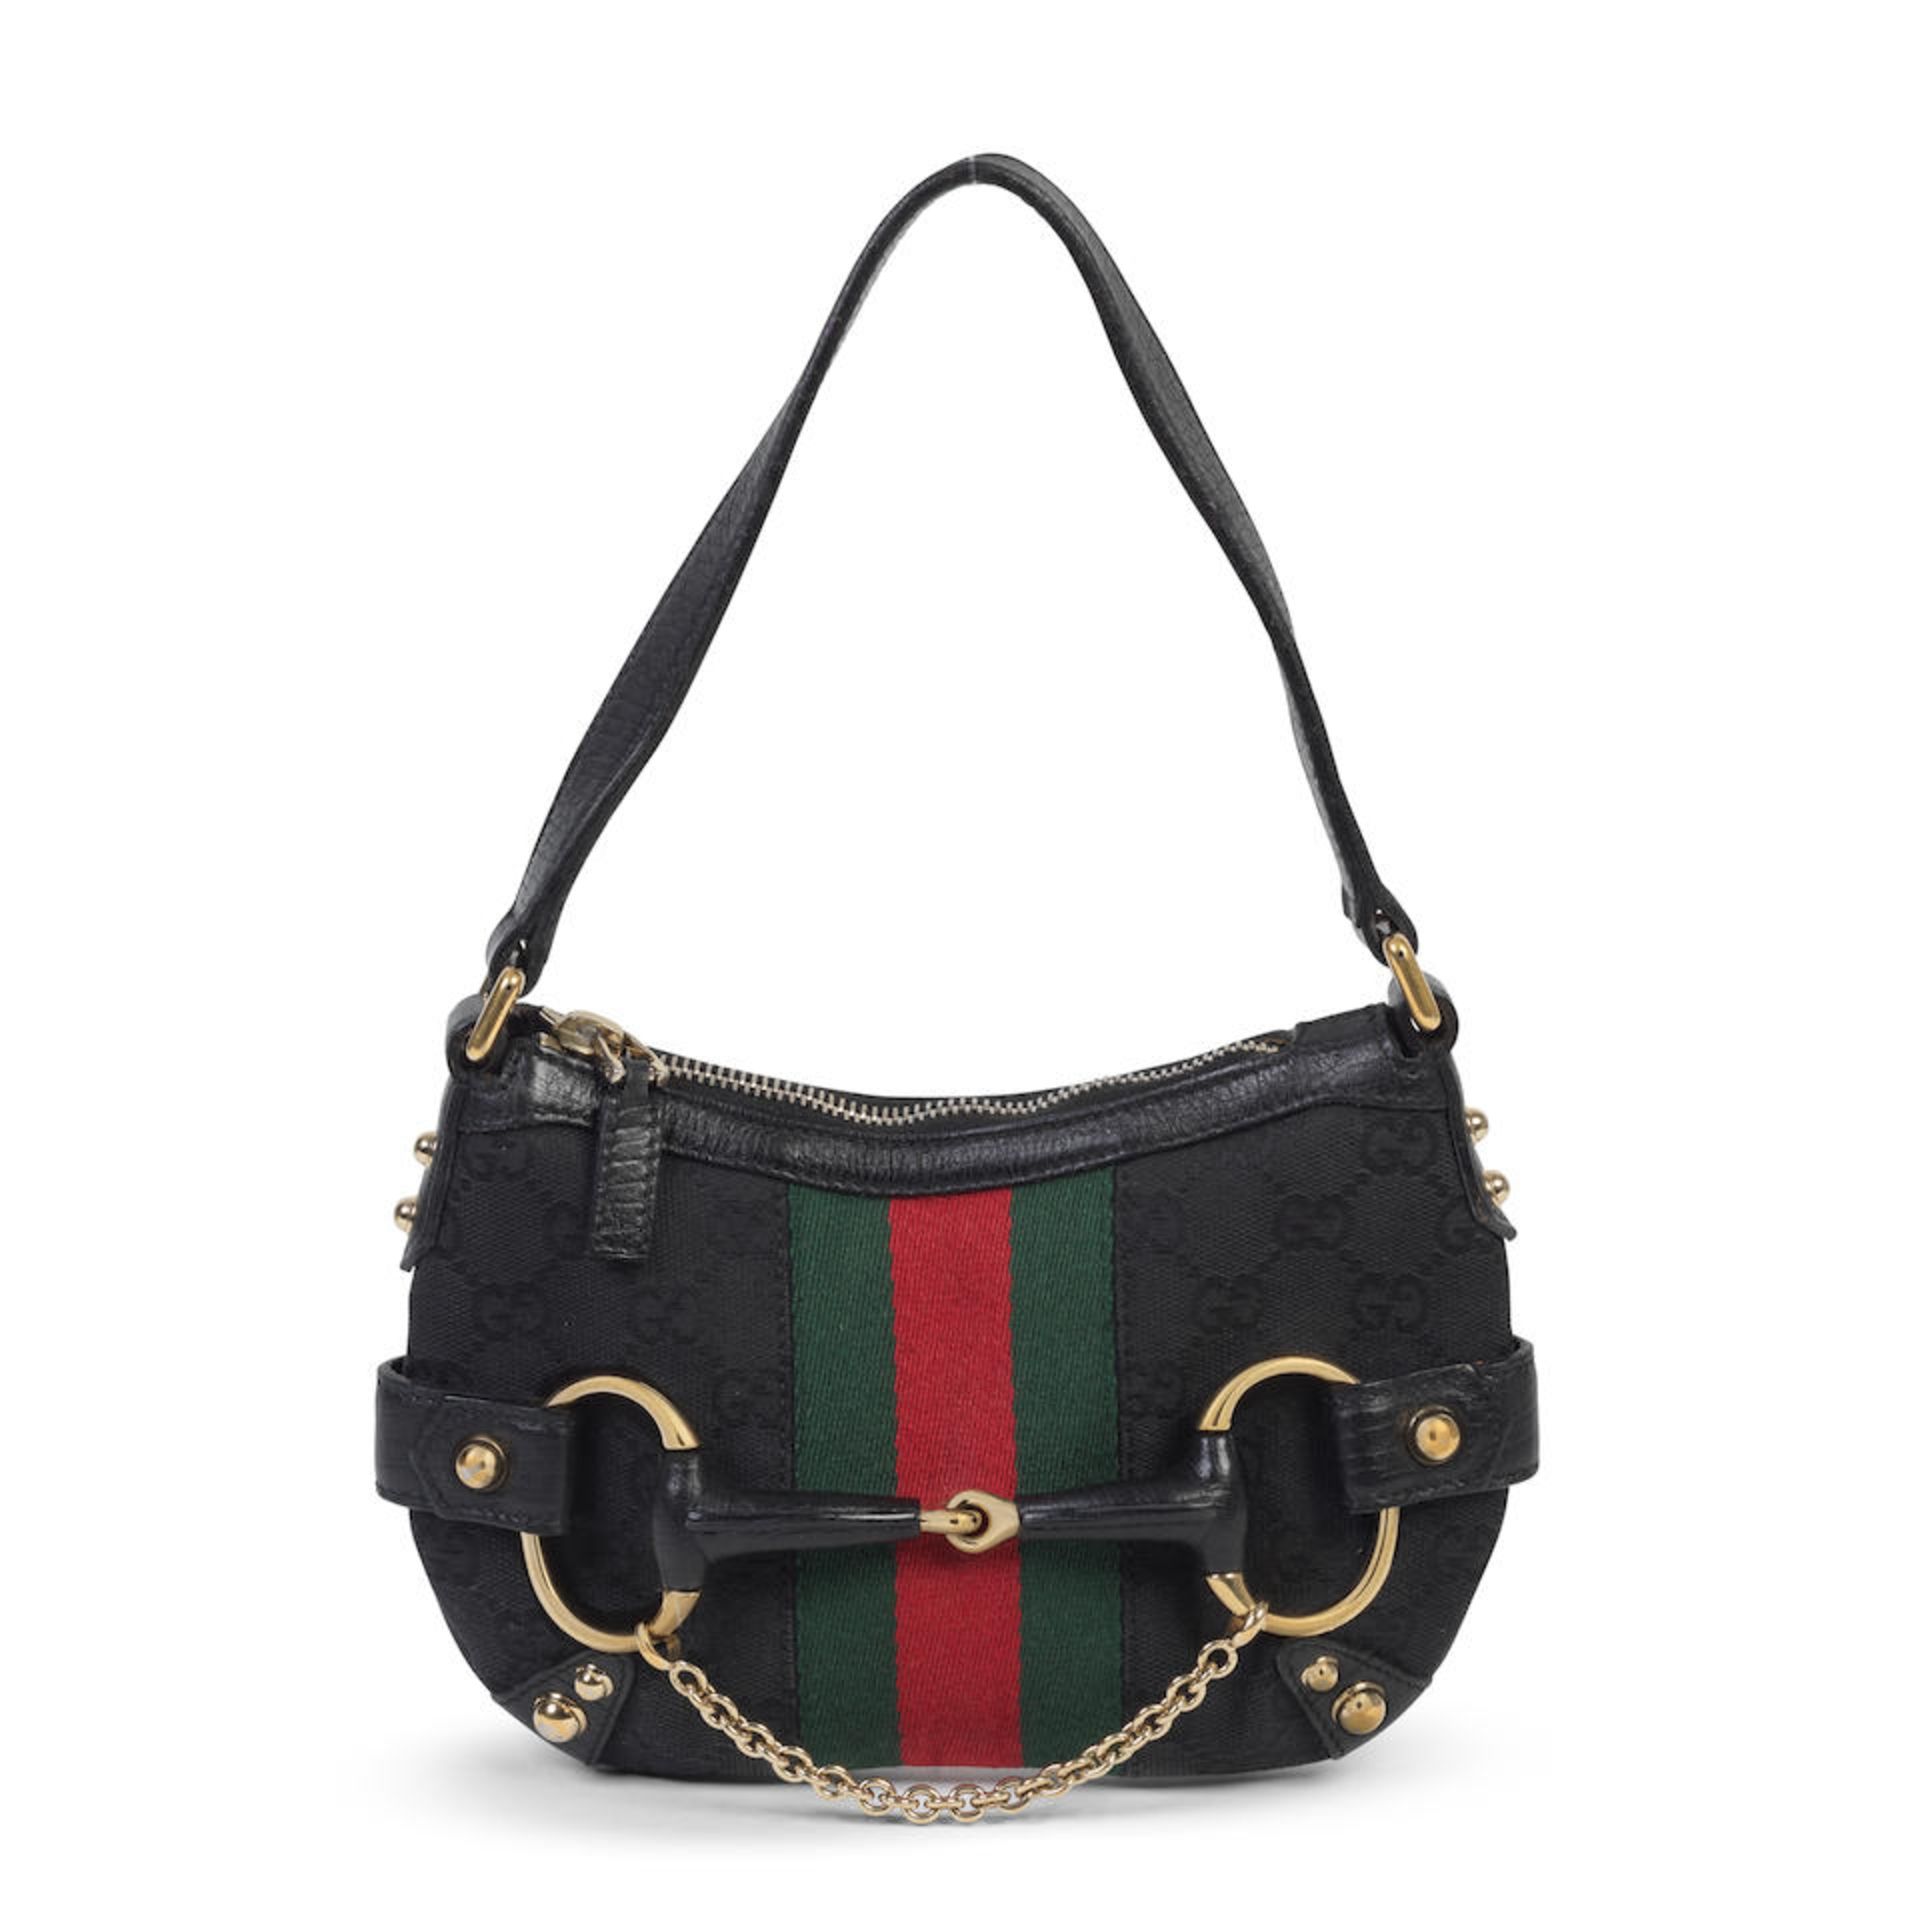 Tom Ford for Gucci: a Black Webbing Mini Horsebit Bag Early 2000s (includes dust bag)